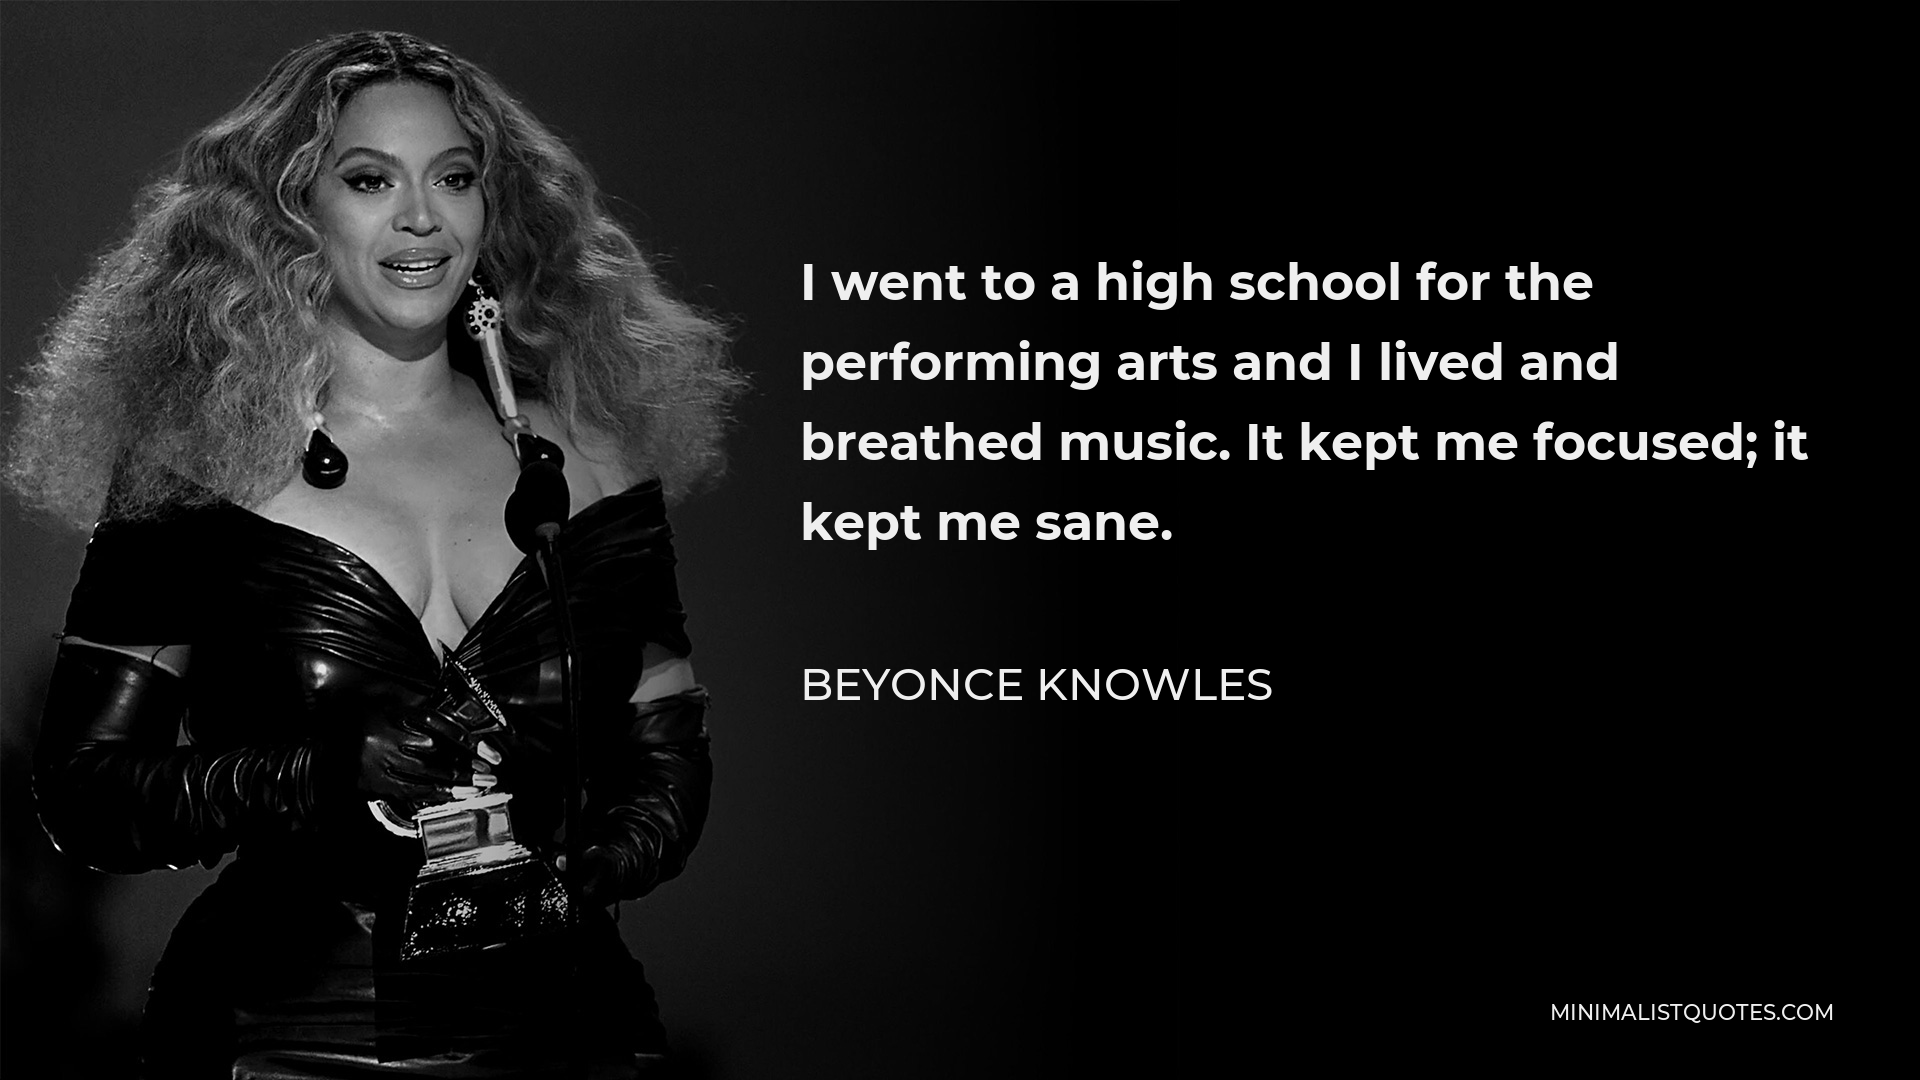 Beyonce Knowles Quote - I went to a high school for the performing arts and I lived and breathed music. It kept me focused; it kept me sane.